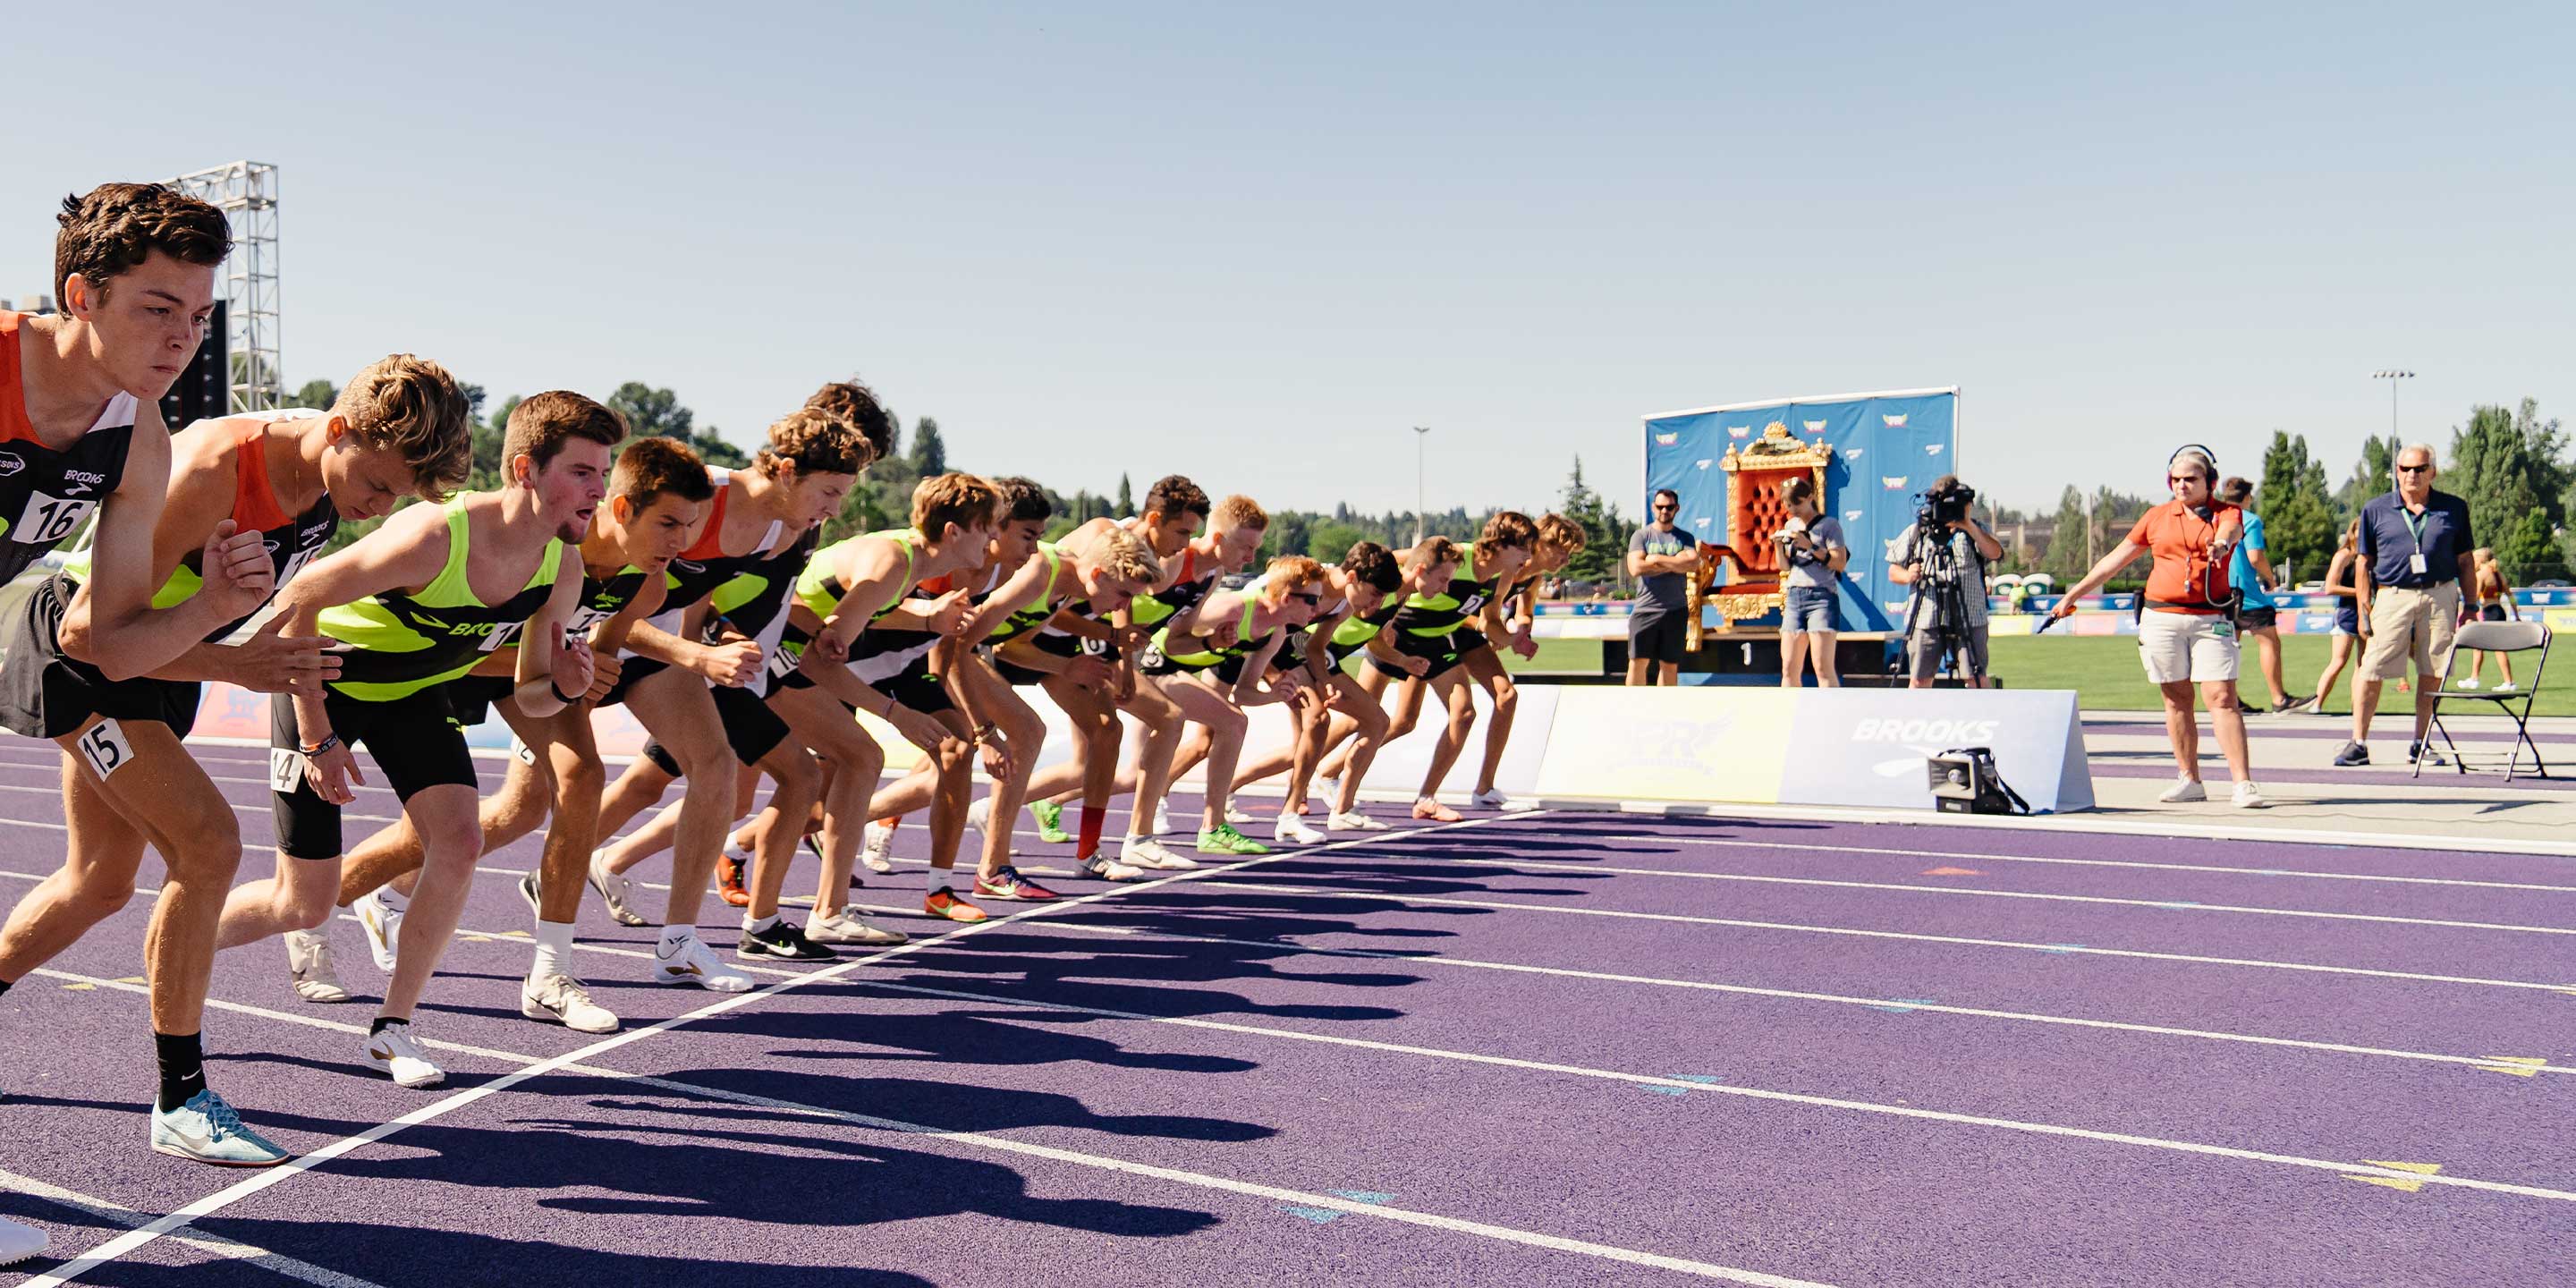 Athletes lined up on the track on a sunny day